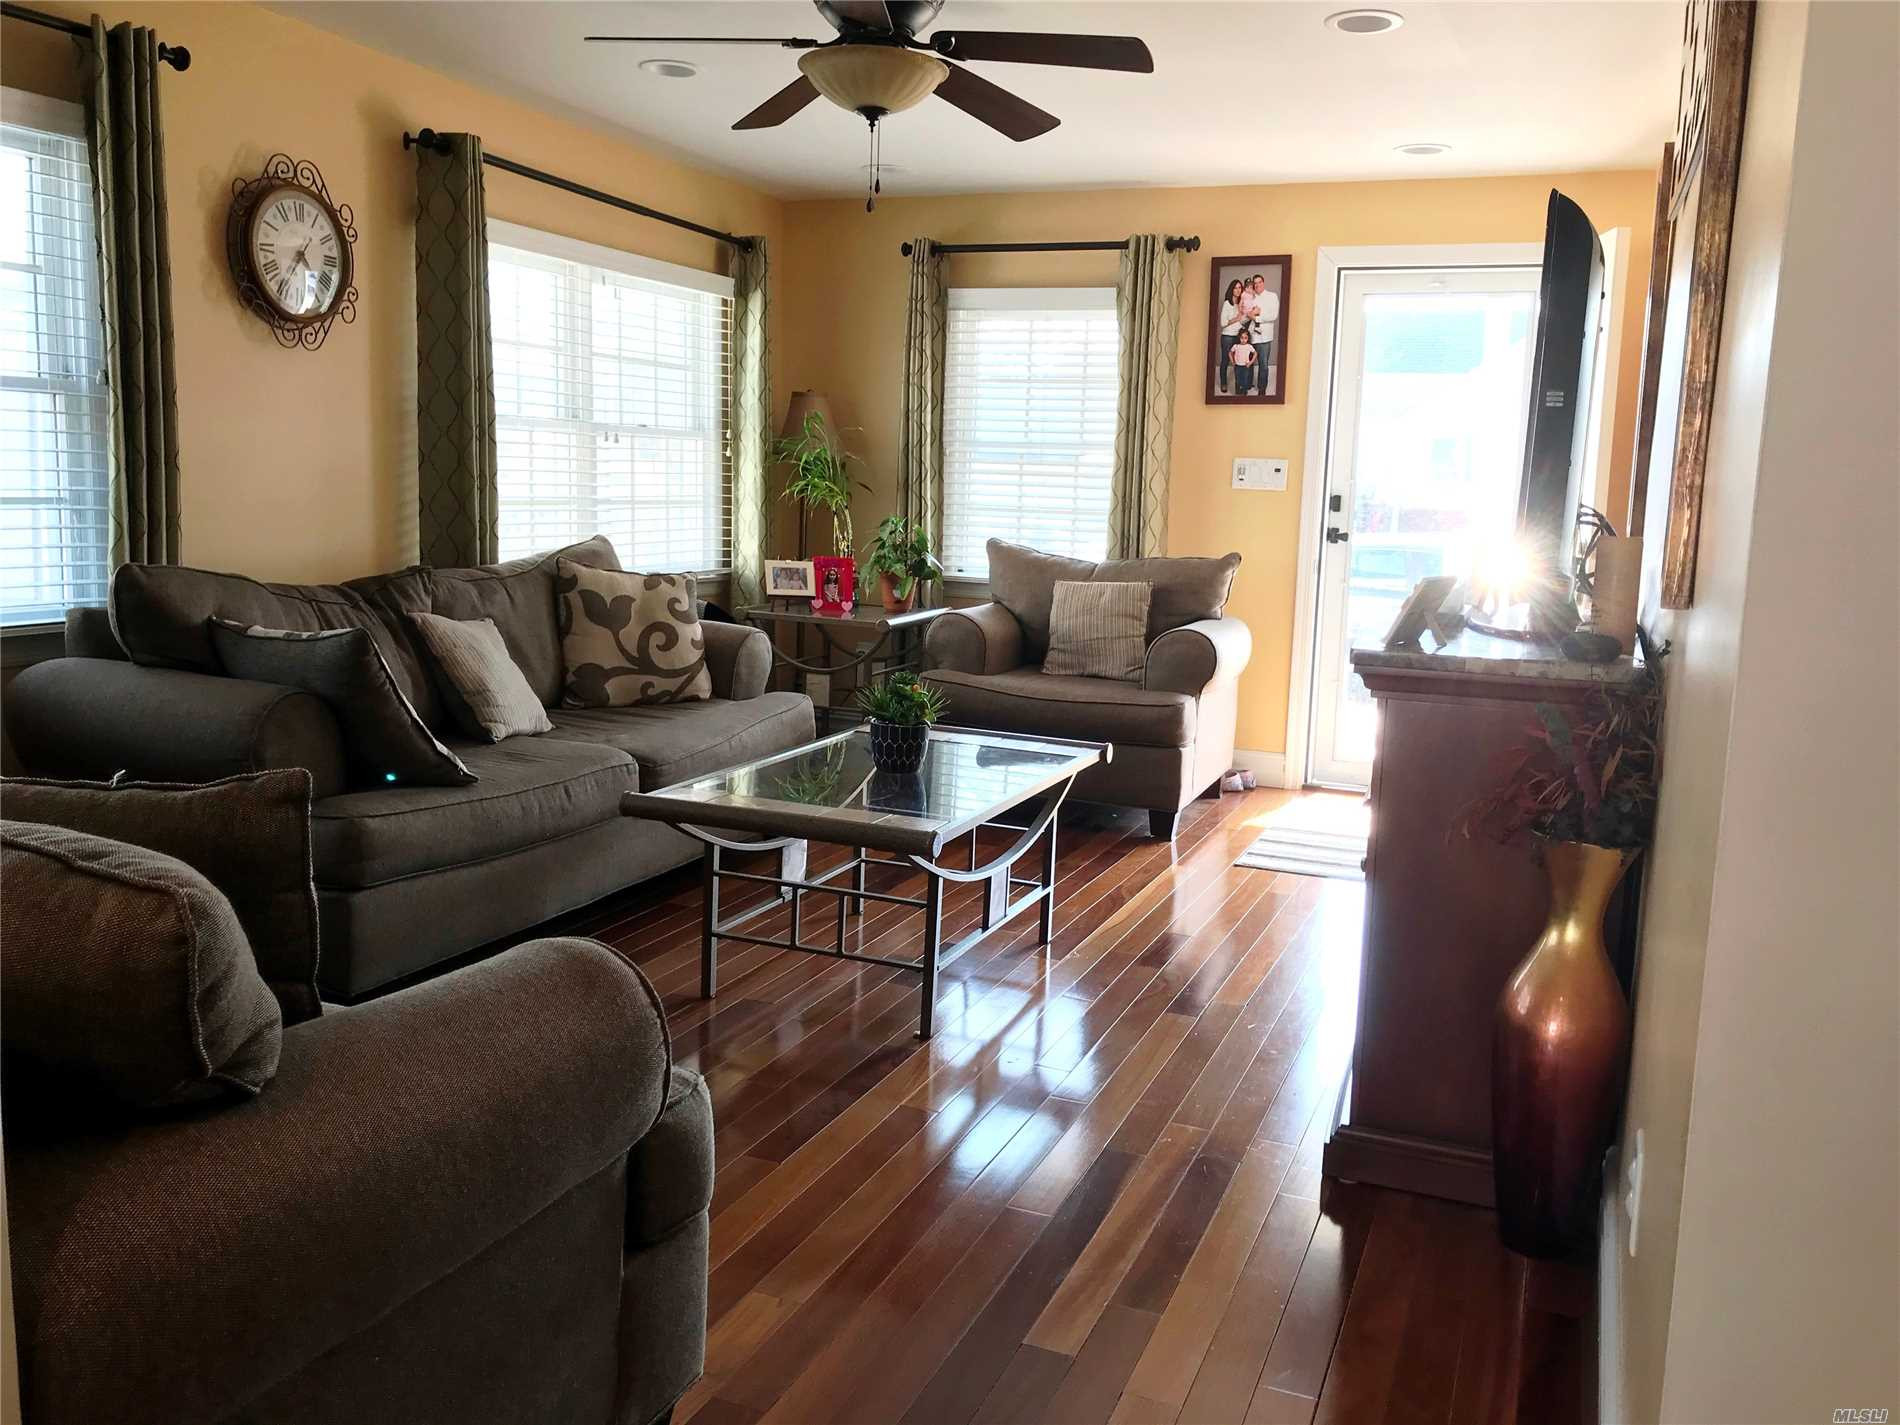 30 attractive Hardwood Floor Refinishing Lynn Ma 2024 free download hardwood floor refinishing lynn ma of homes for sale in lindenhurst house hunt ny house hunt ny with regard to original 28799631862178836